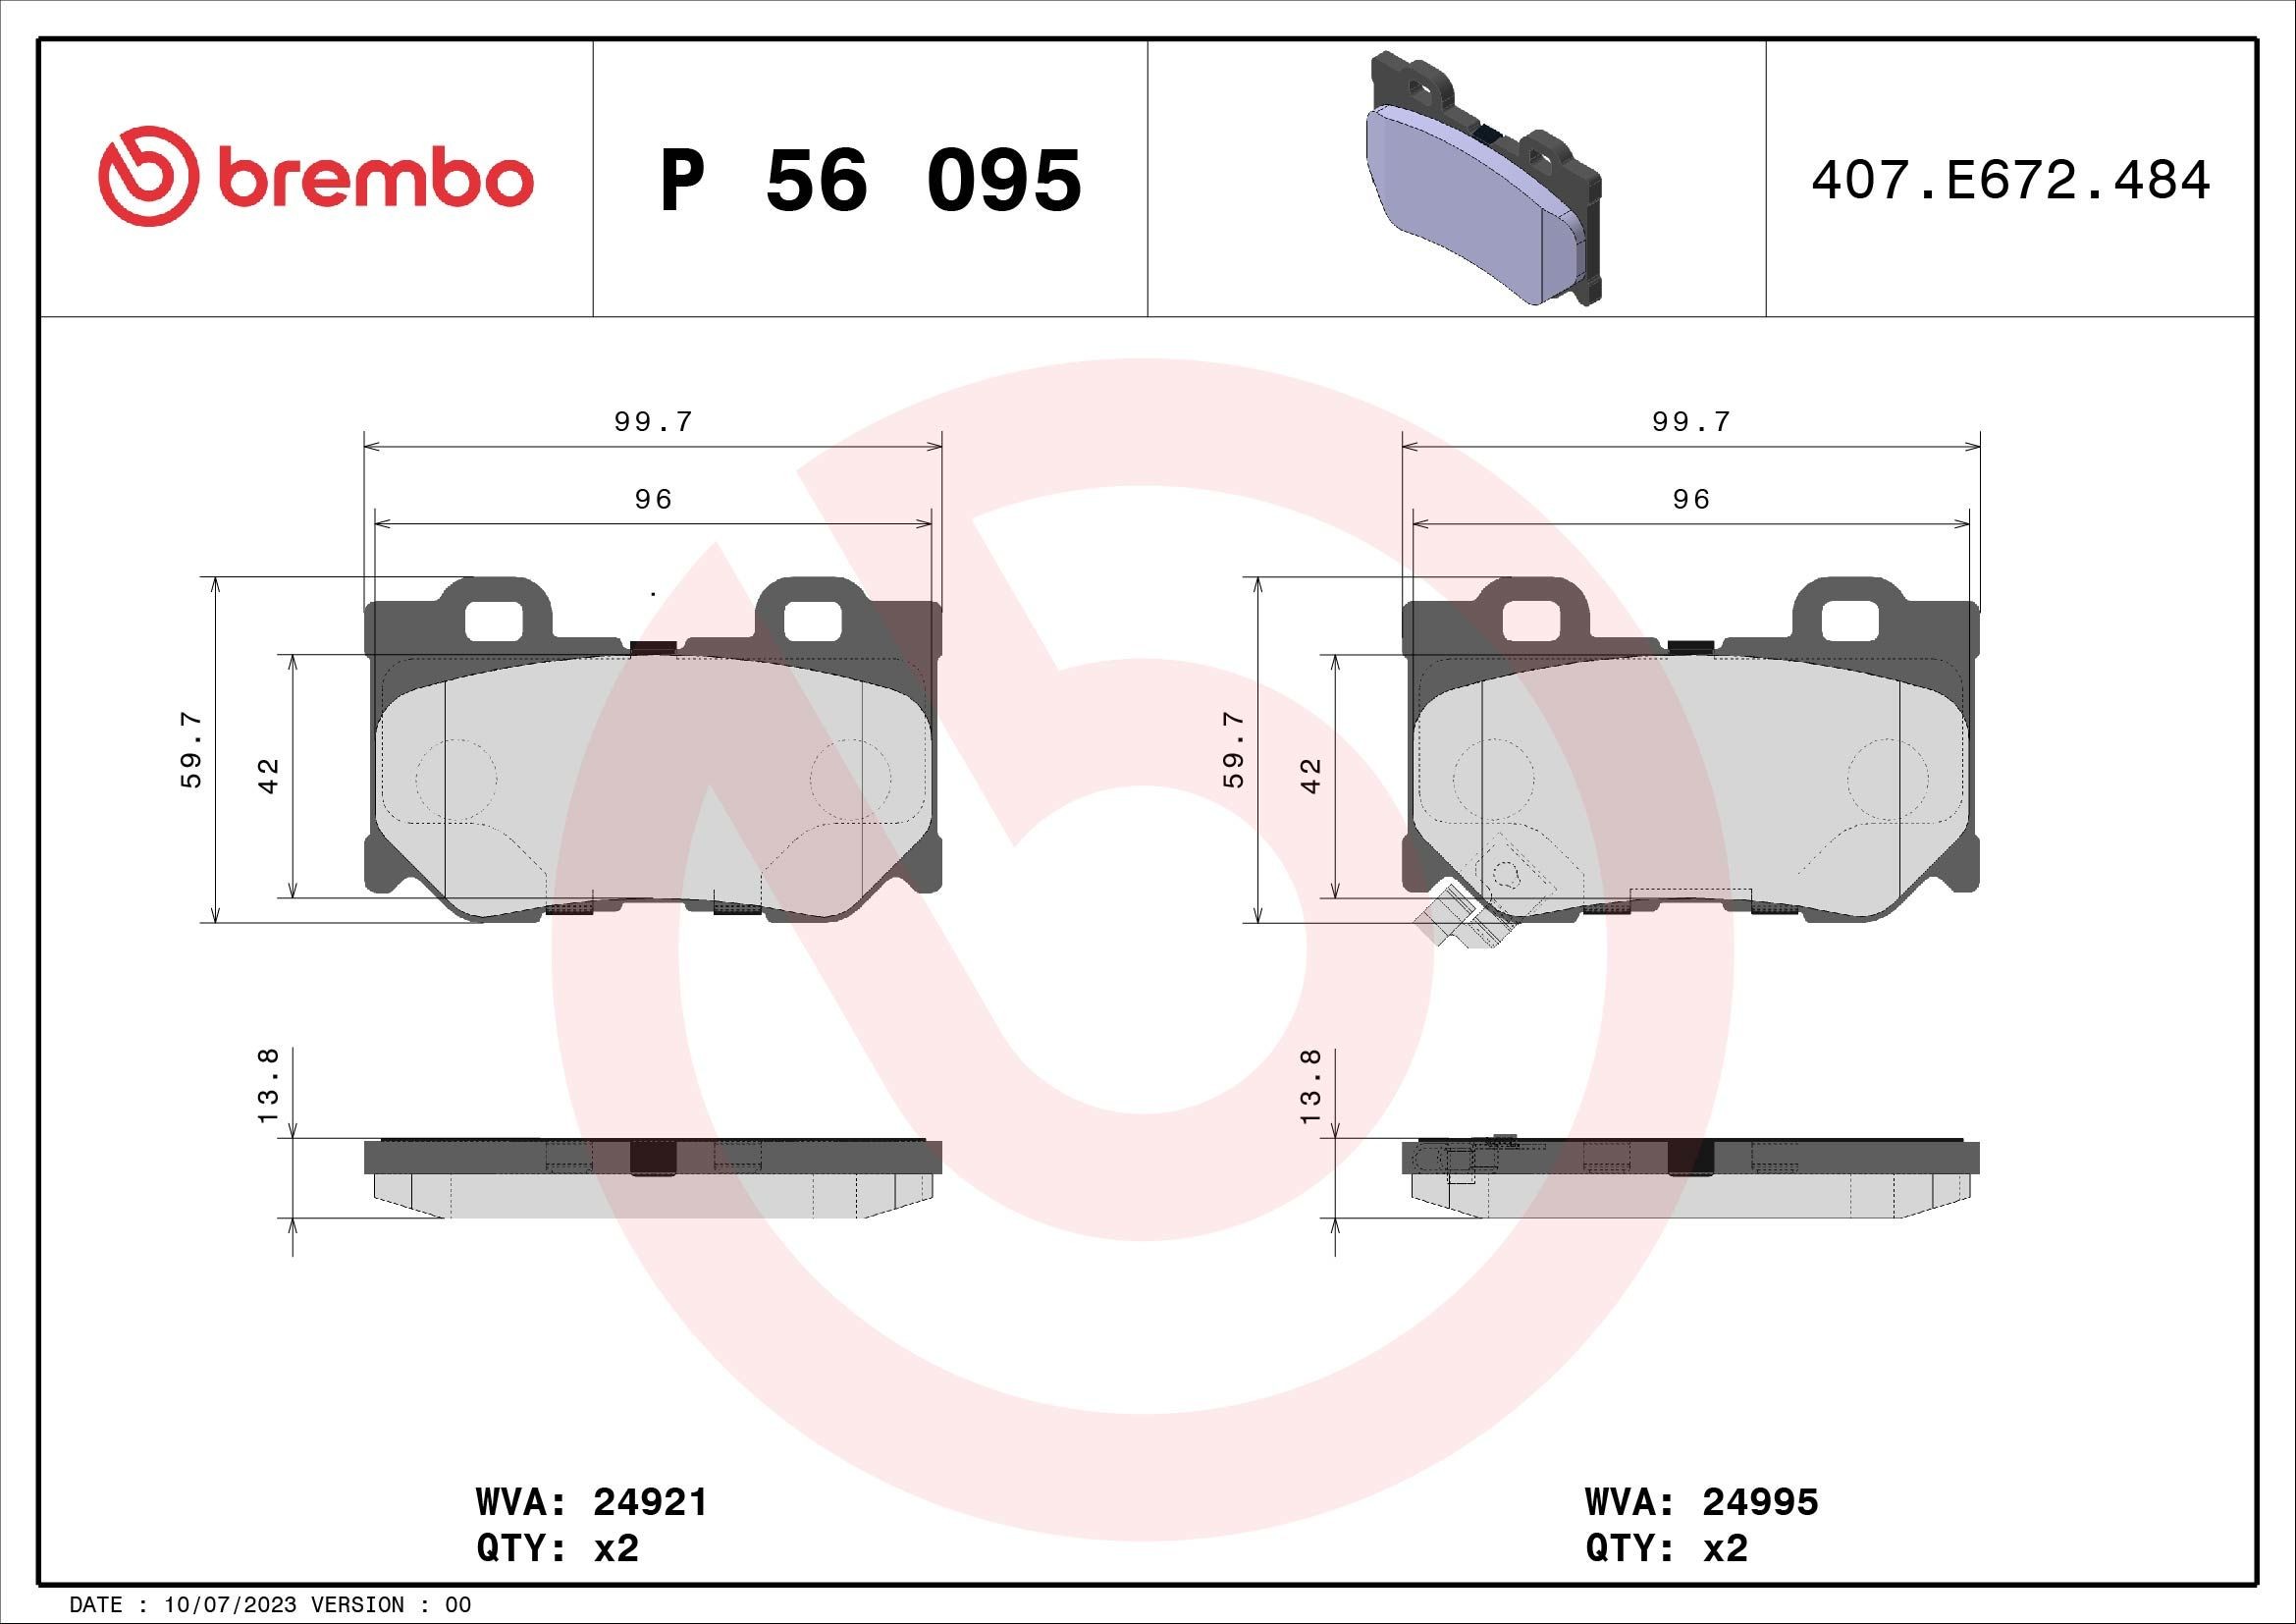 BREMBO P 56 095 Brake pad set with acoustic wear warning, without accessories